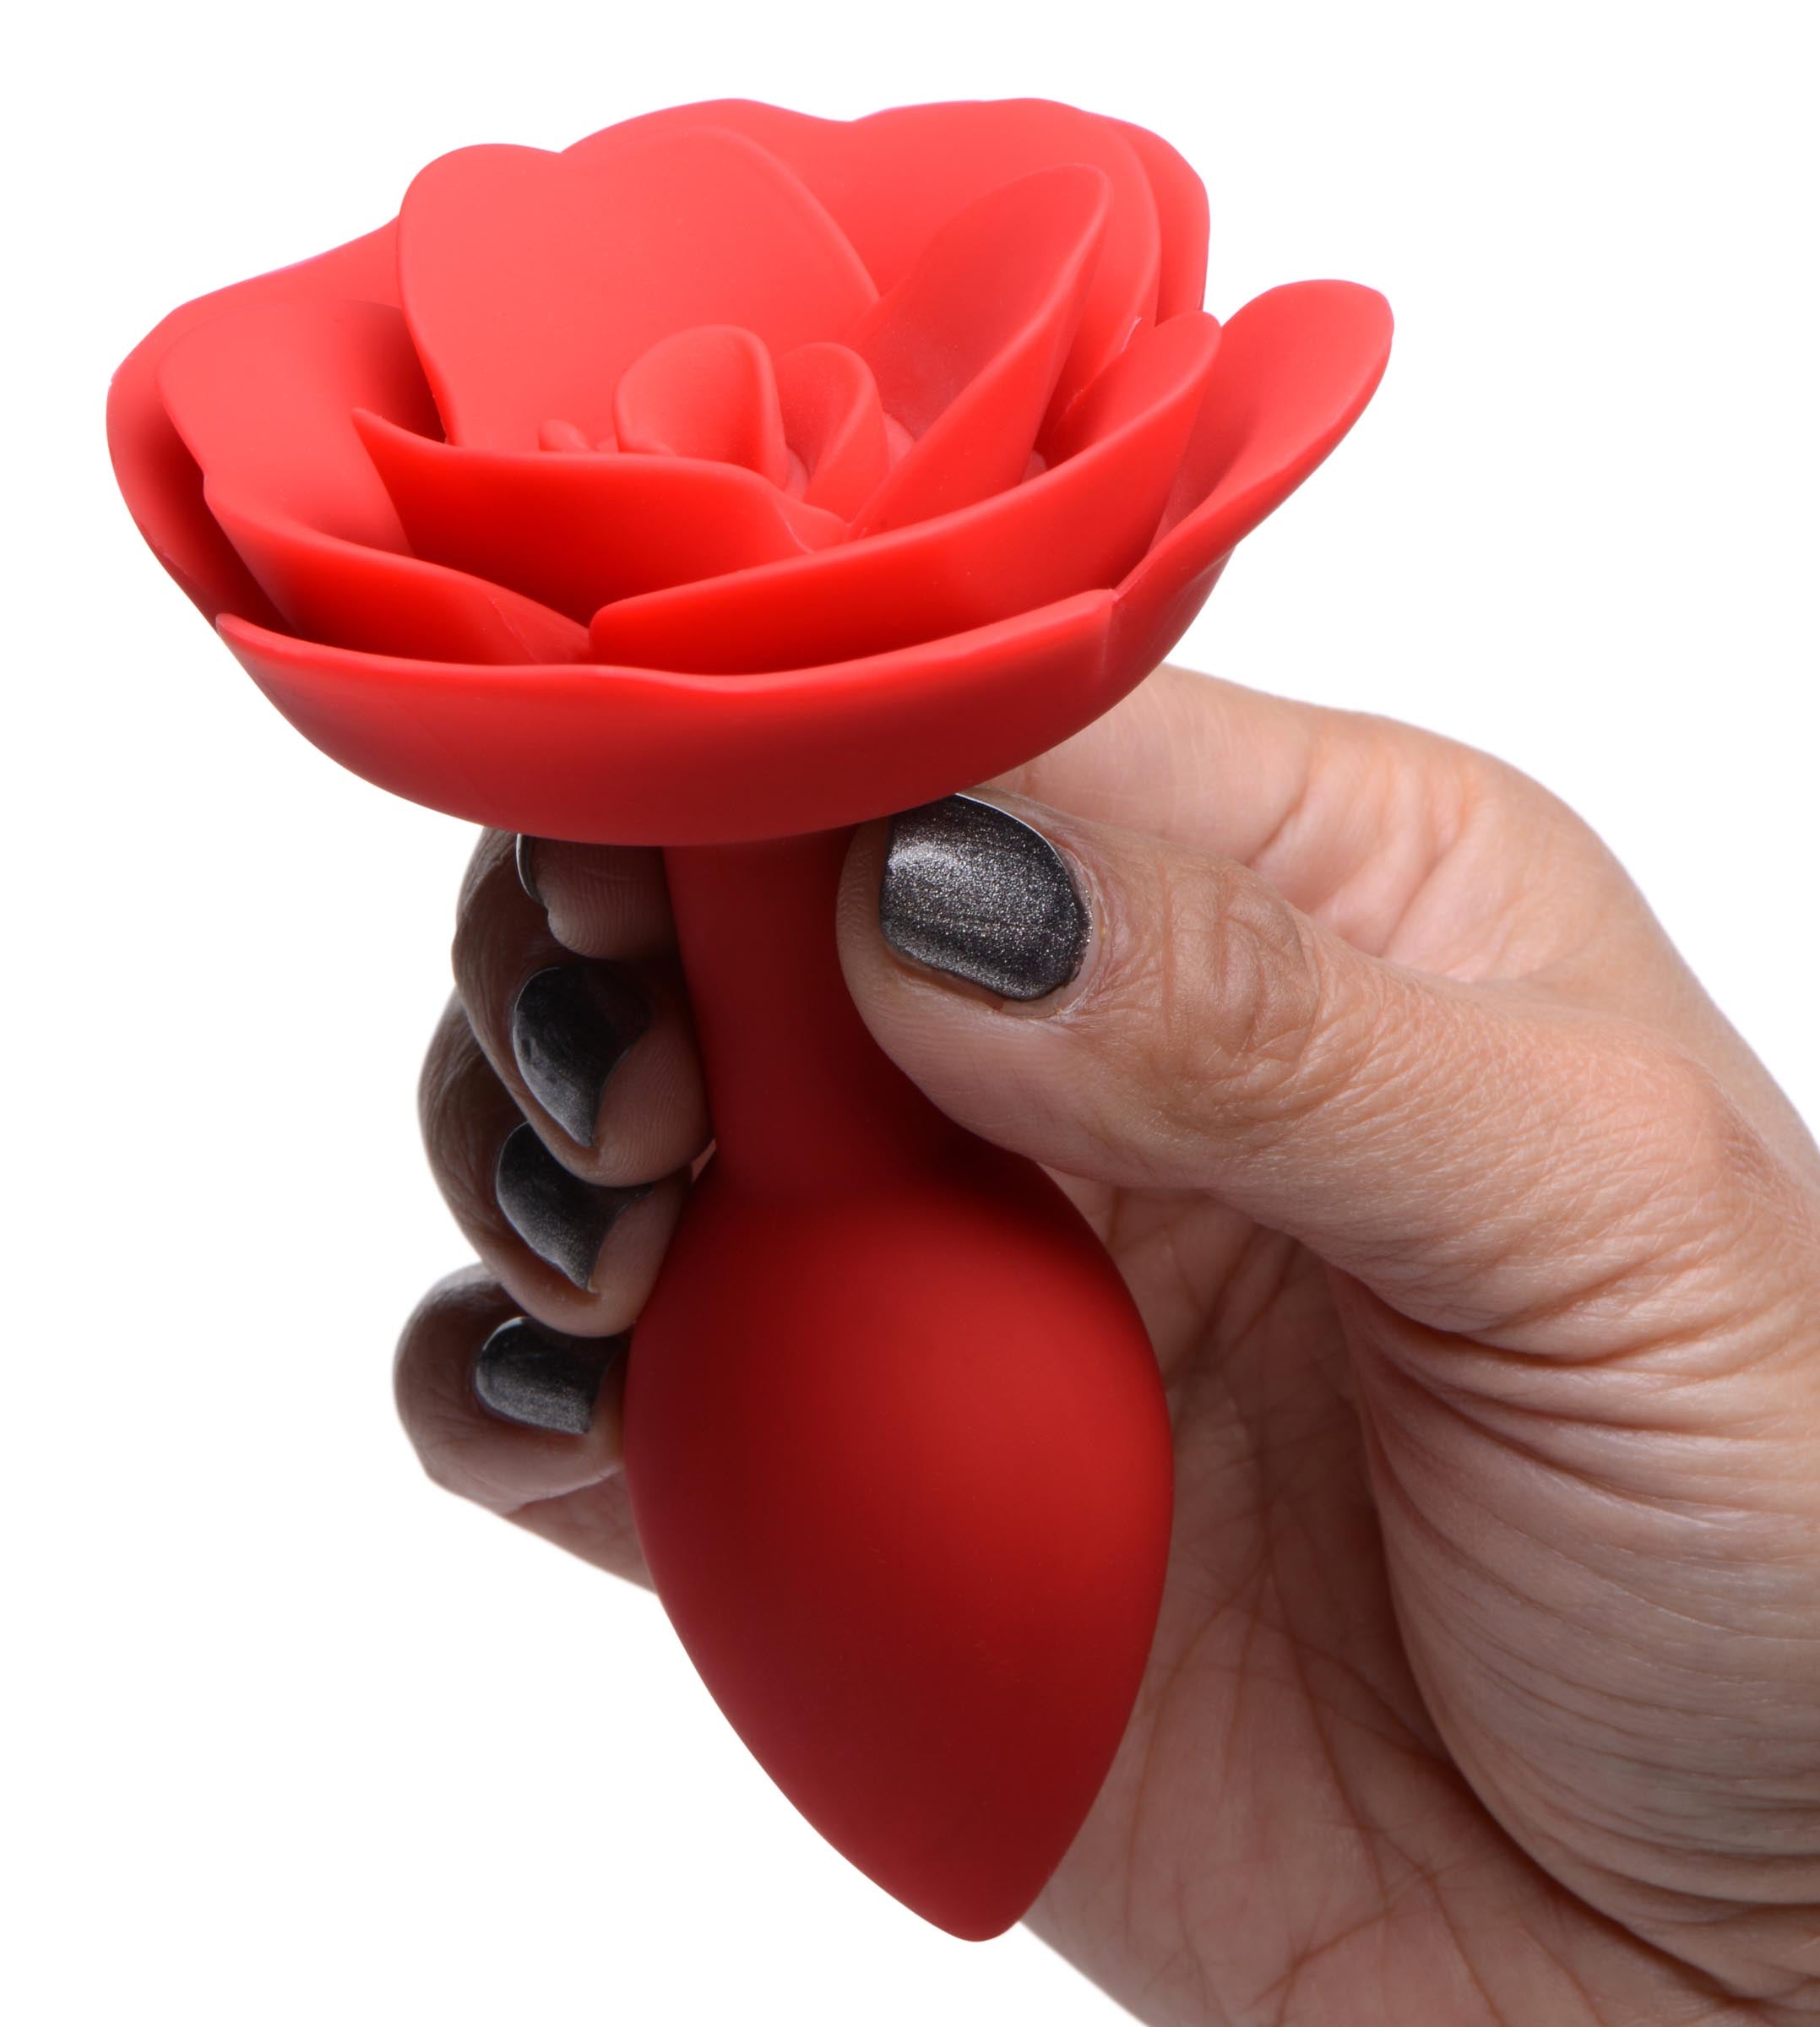 Booty Bloom Silicone Rose Anal Plug